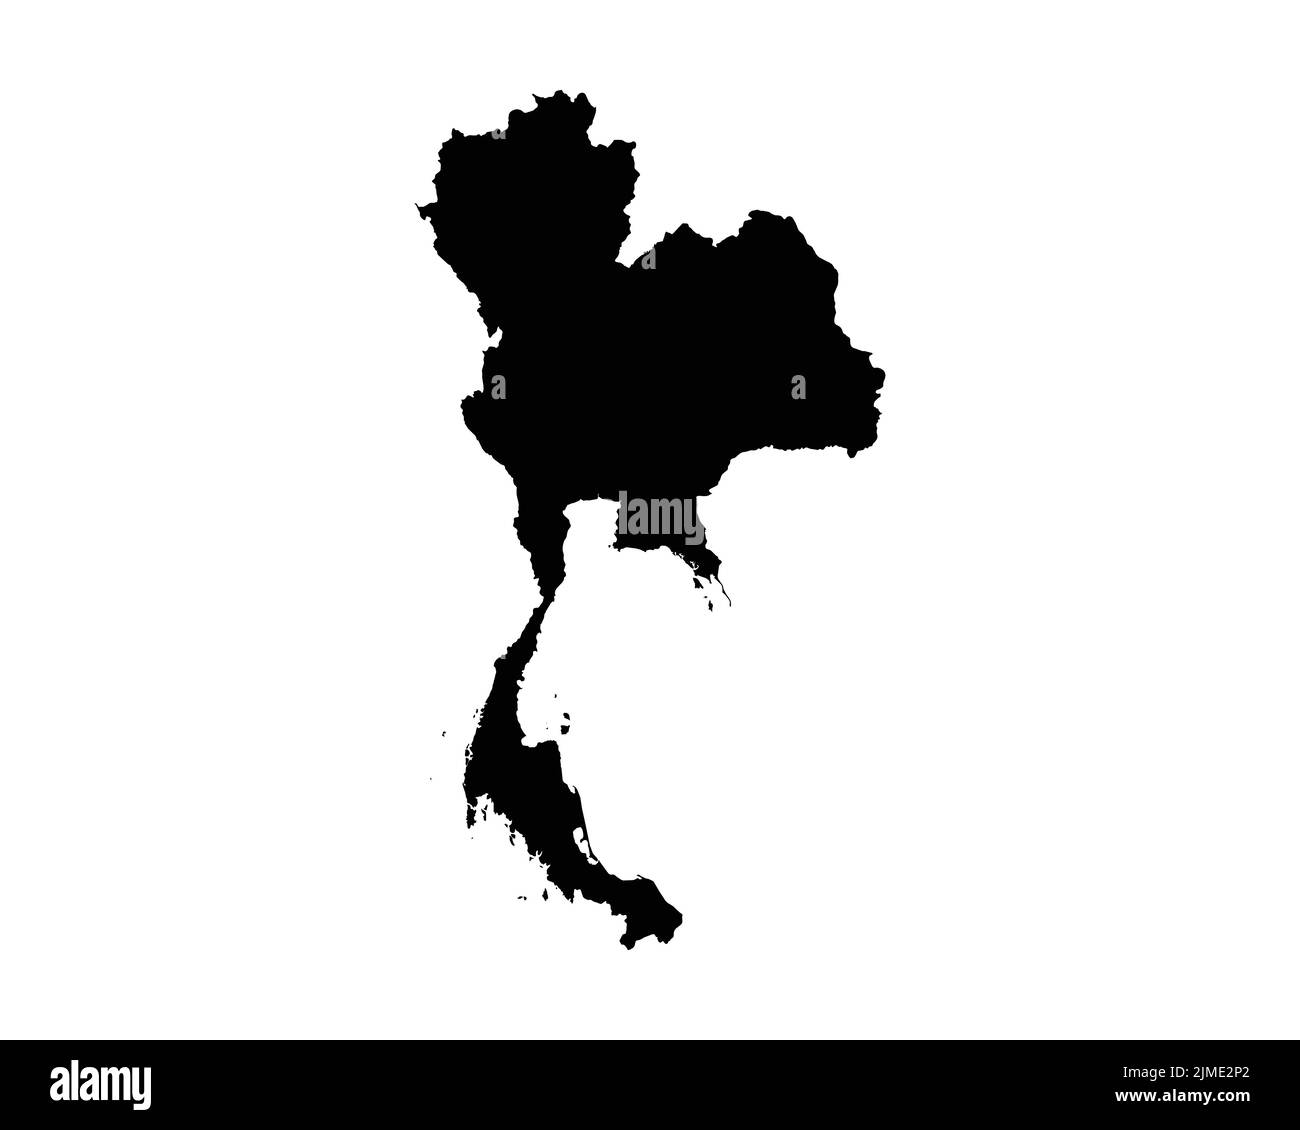 Thailand Map. Thai Country Map. Black and White Siam Siamese National Nation Geography Outline Border Boundary Territory Shape Vector Illustration EPS Stock Vector